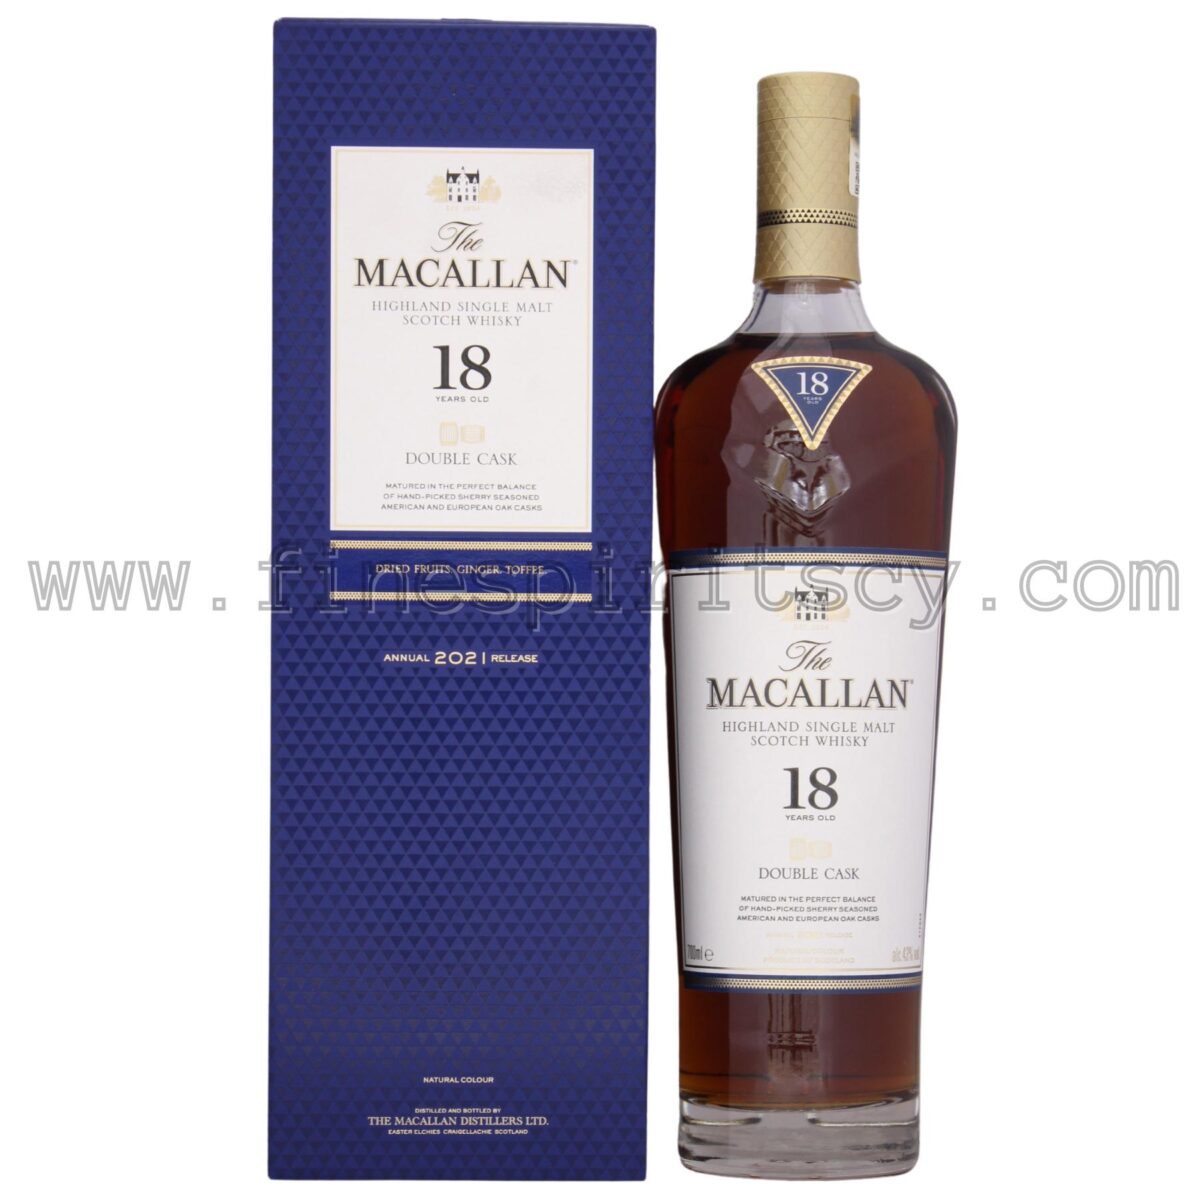 Macallan 18 Year Old Premium Scotch Double Cask Cyprus Price 2021